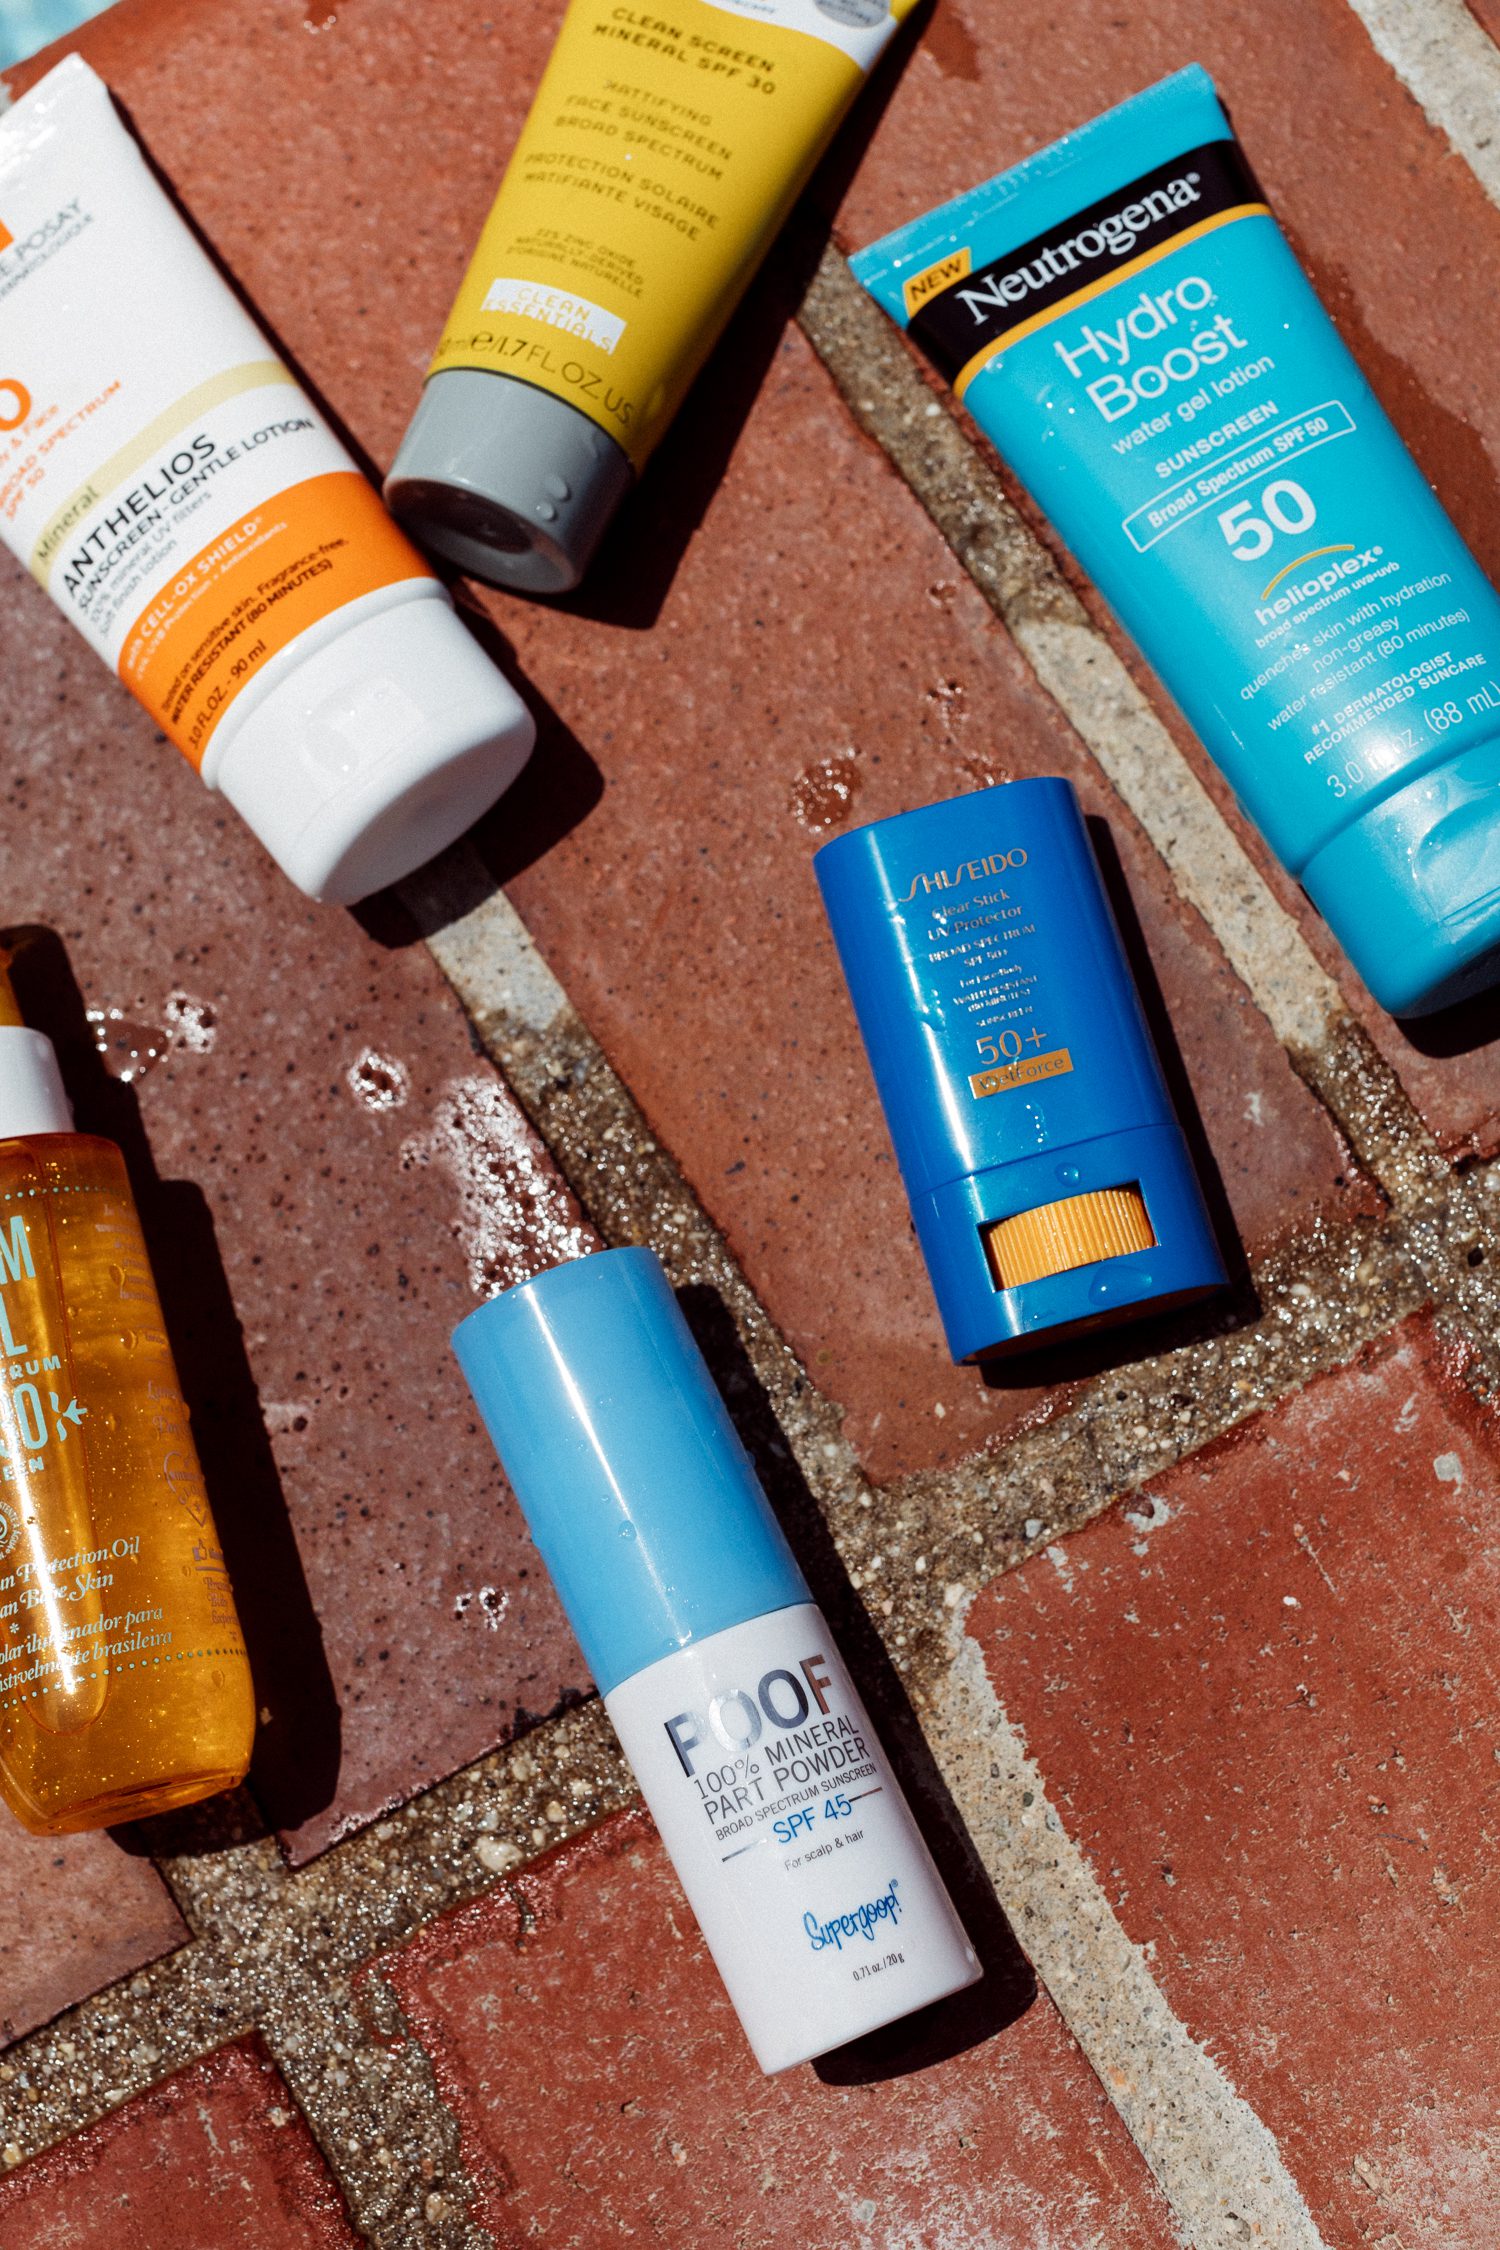 A collection of sunscreens